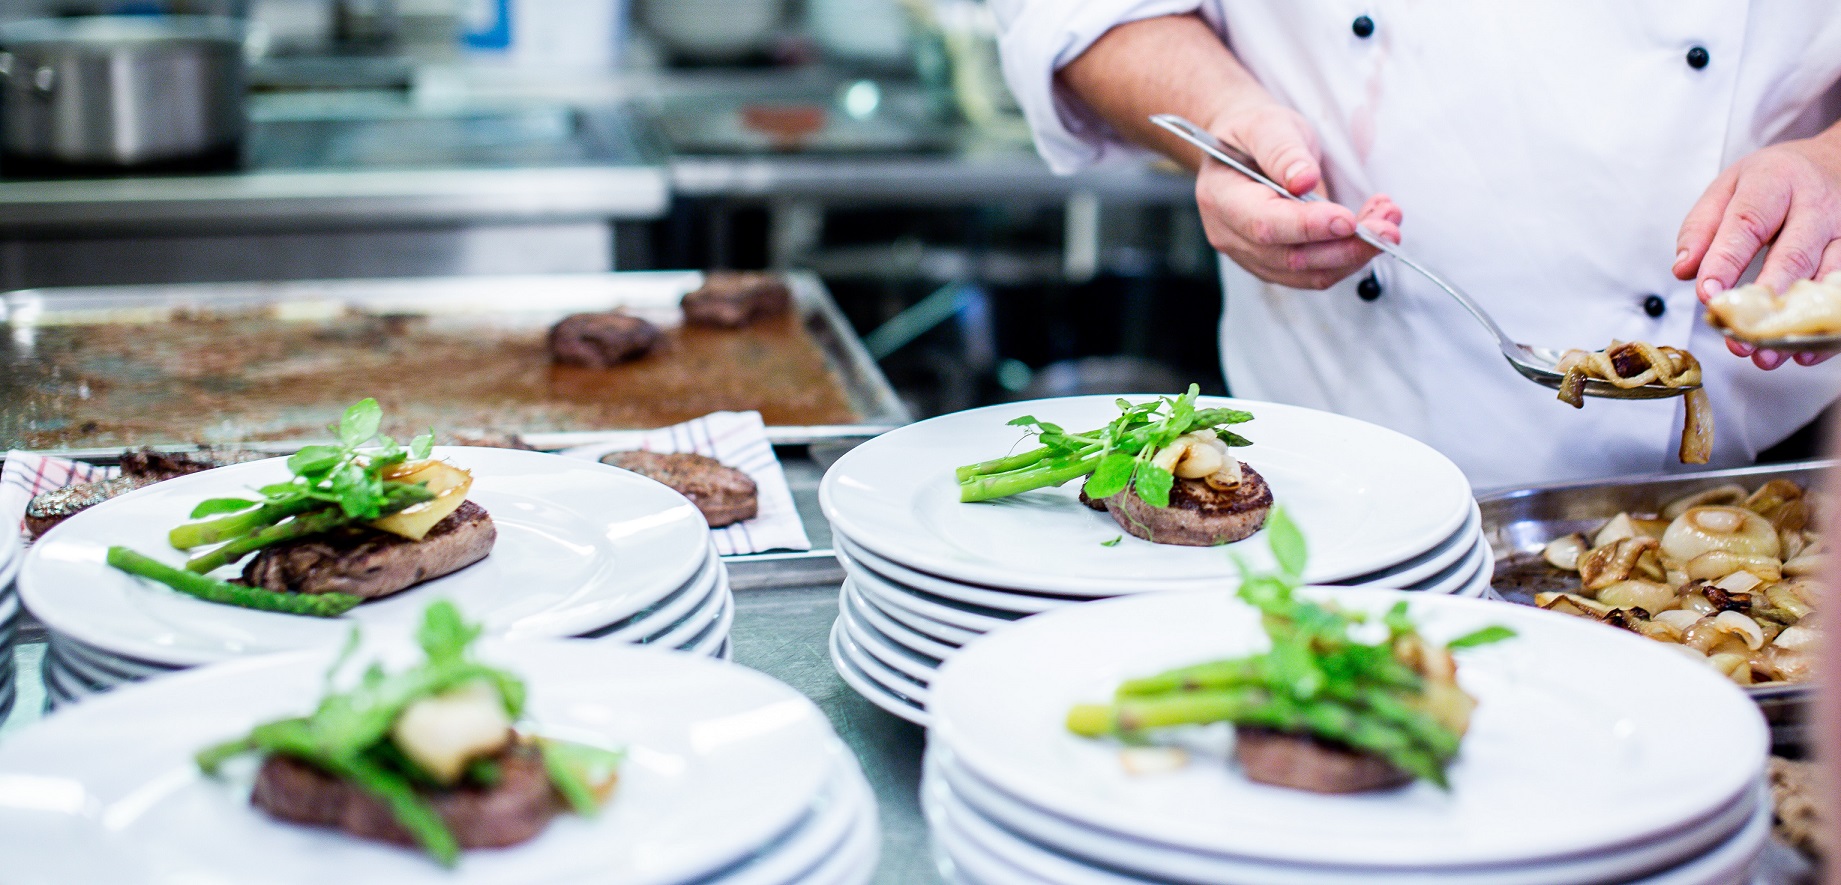 What Are The Basic Tastes a Chef Must Know?